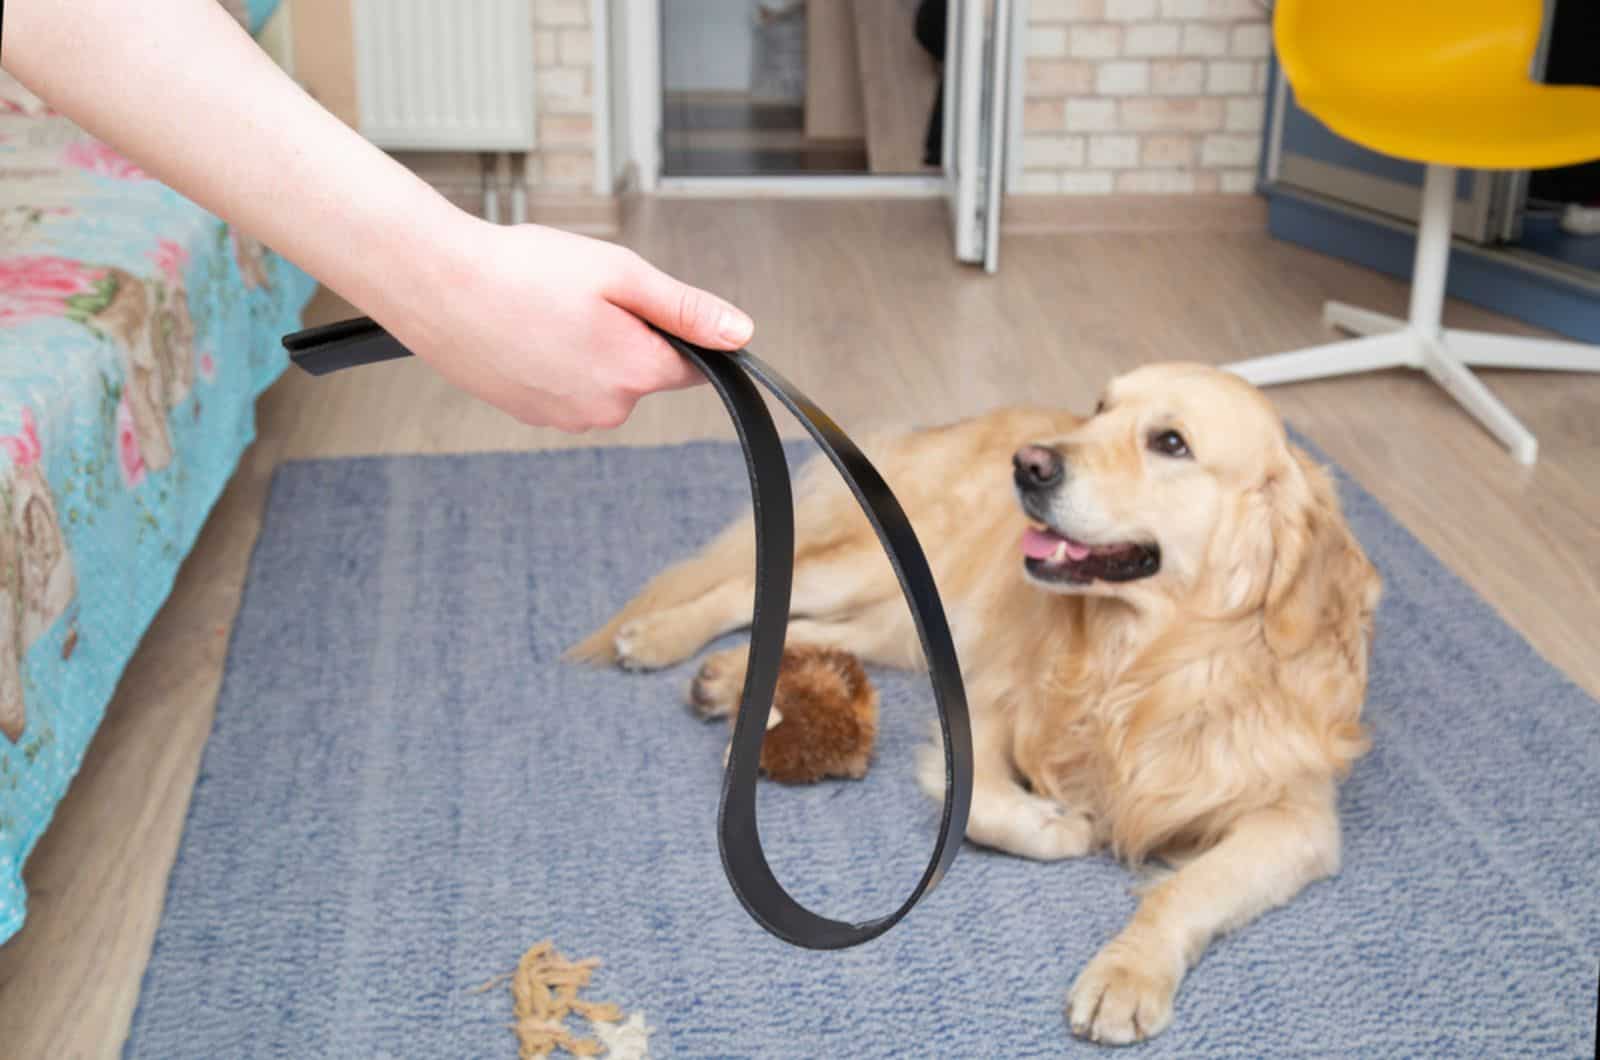 woman punishing a dog with a belt in the room